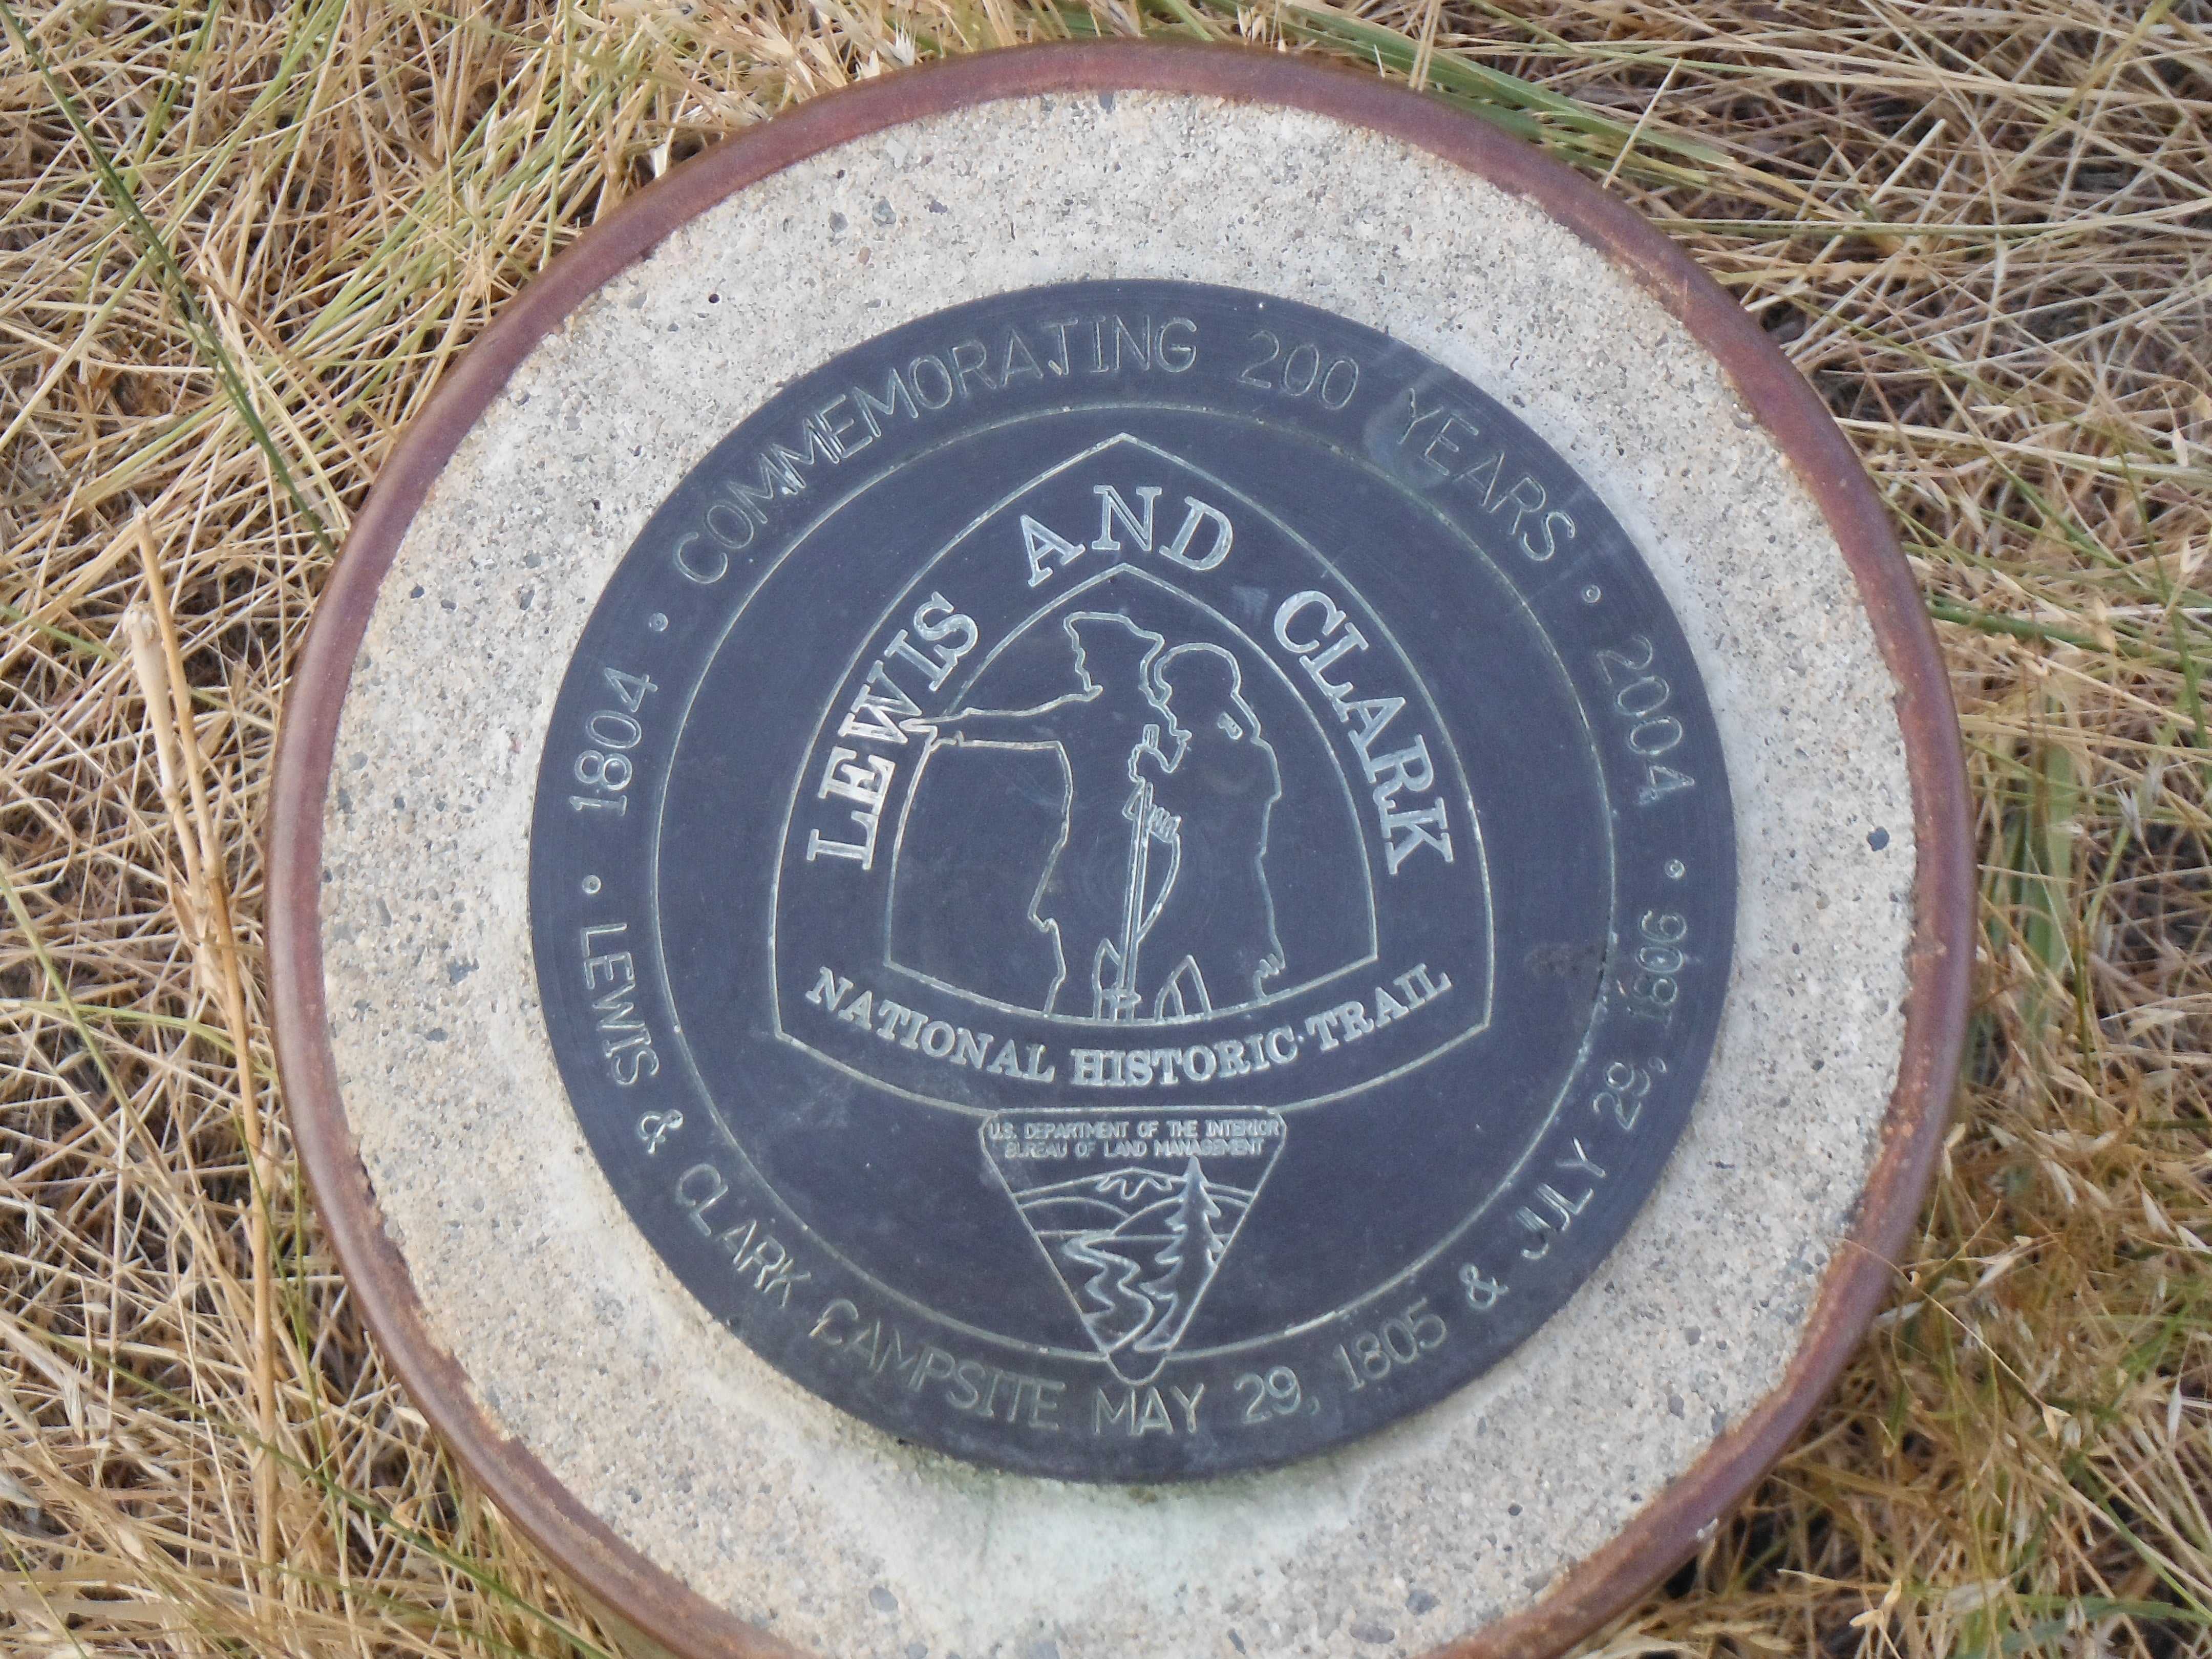 Brass Marker at Lewis and Clark campsite on May 29, 1805 and July 29, 1806